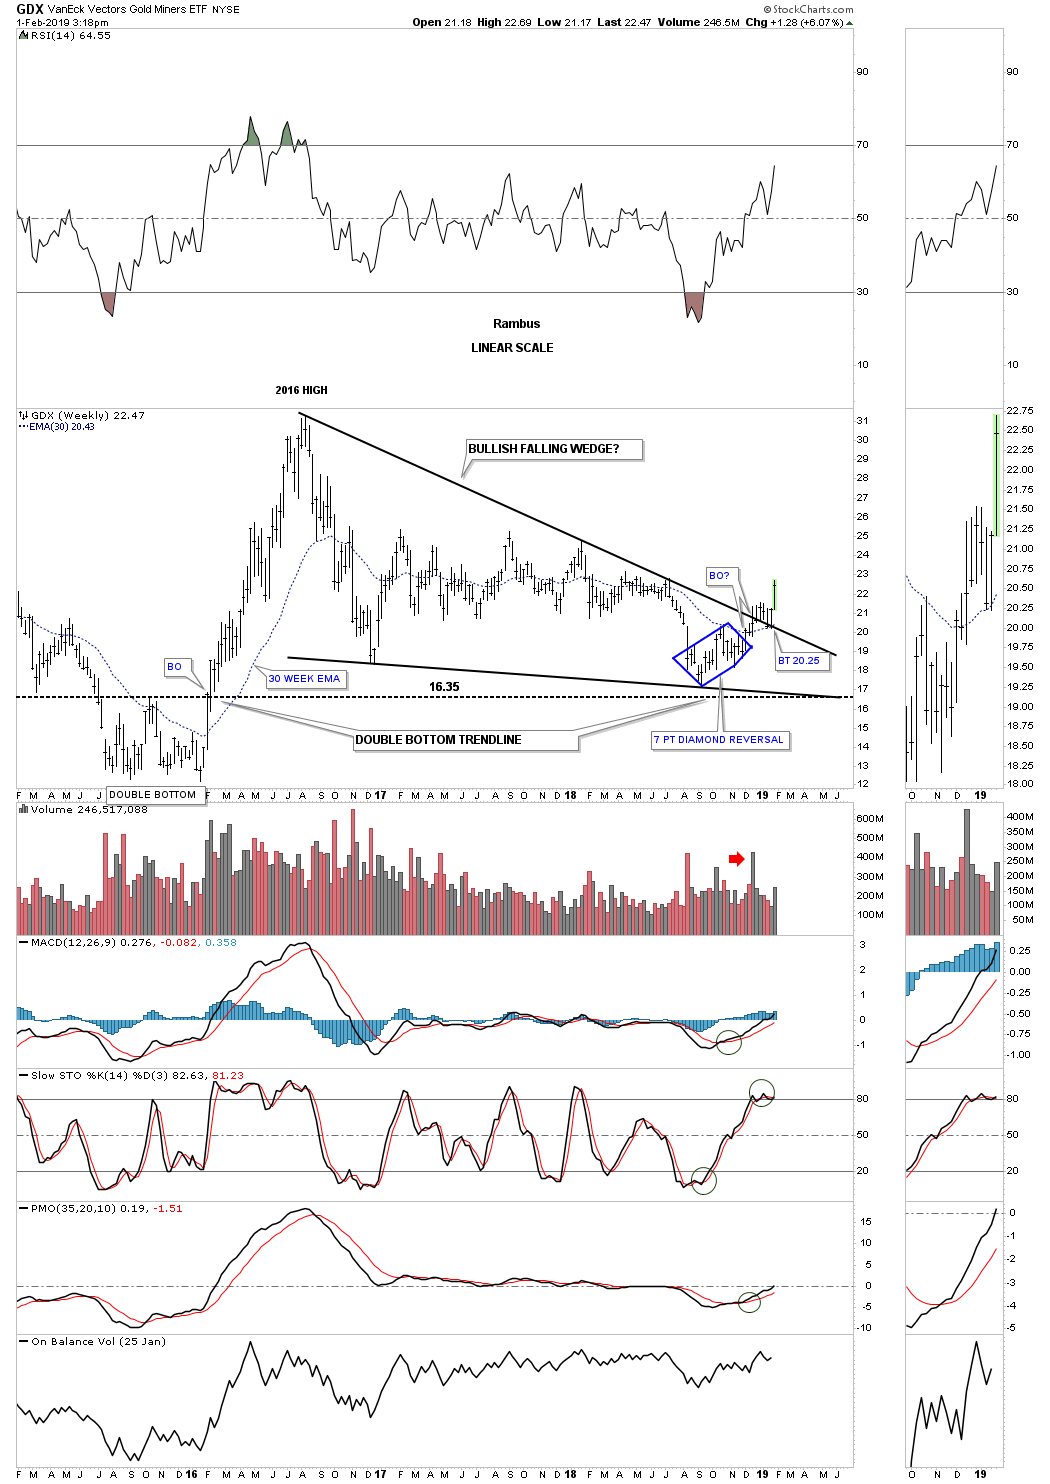 GDX Weekly Chart